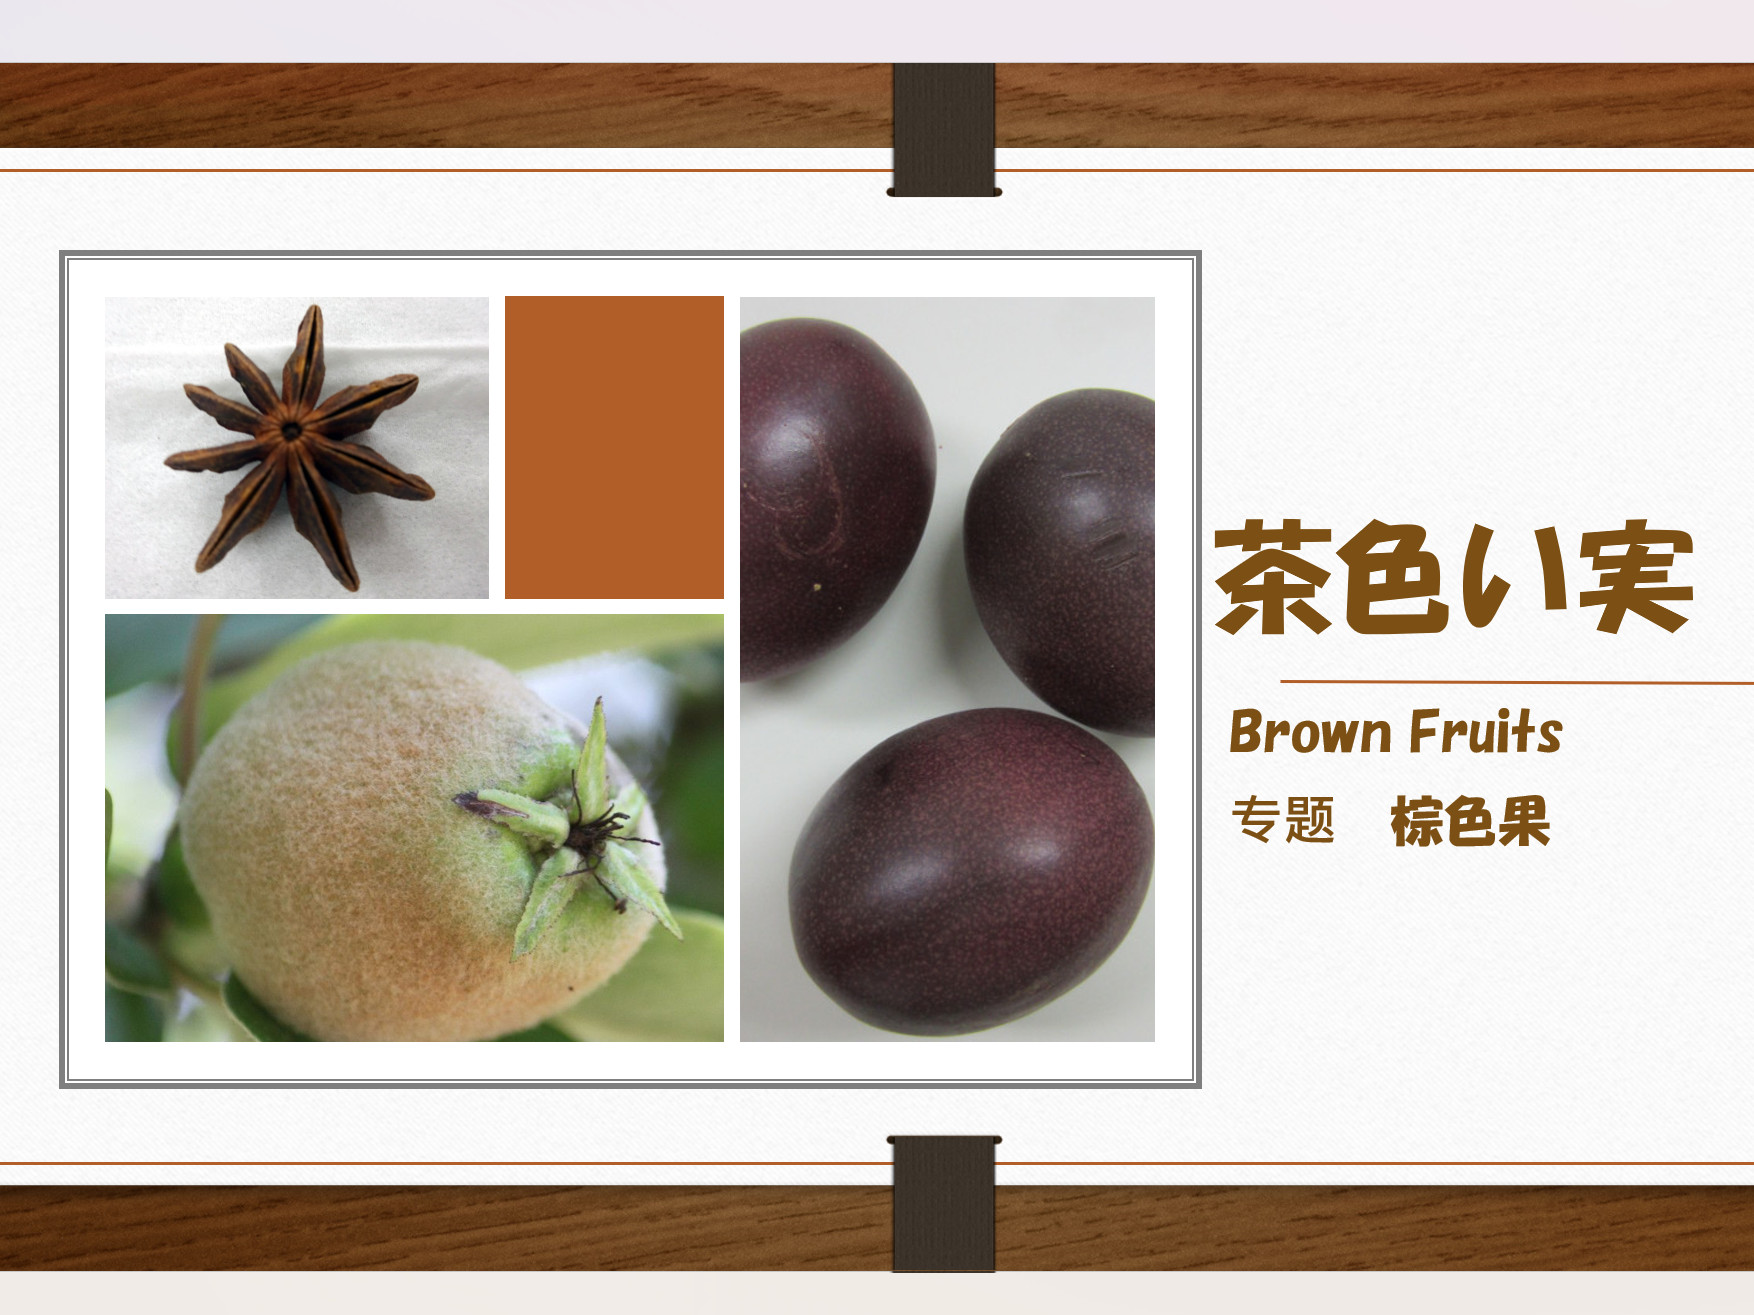 Feature Brown Fruits